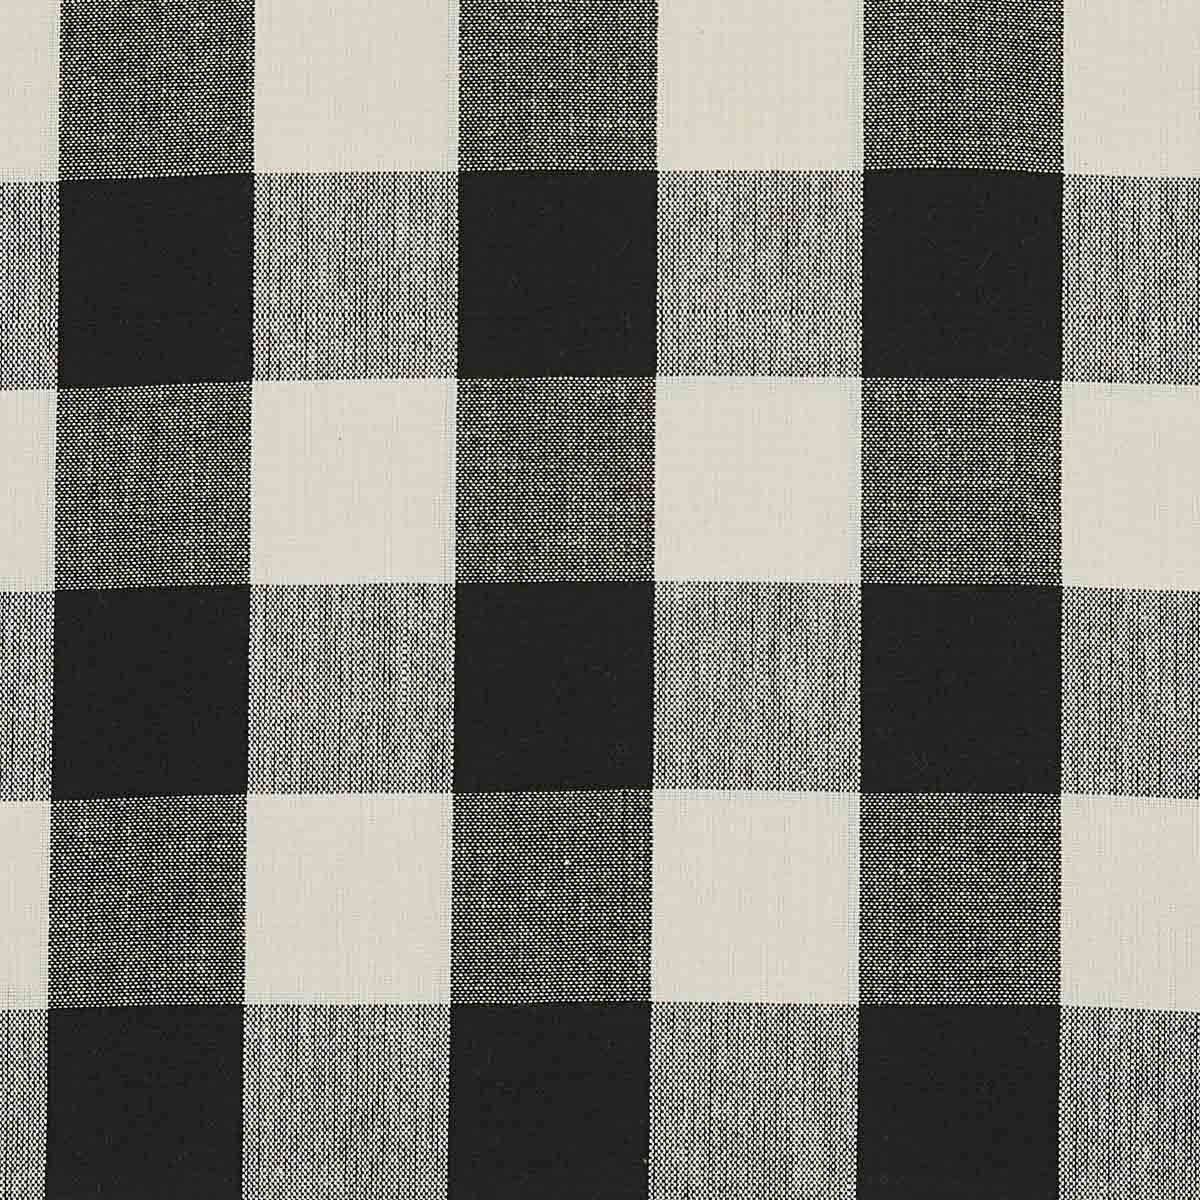 Wicklow Check Placemats - Black & Cream Backed Set of 6 Park Designs